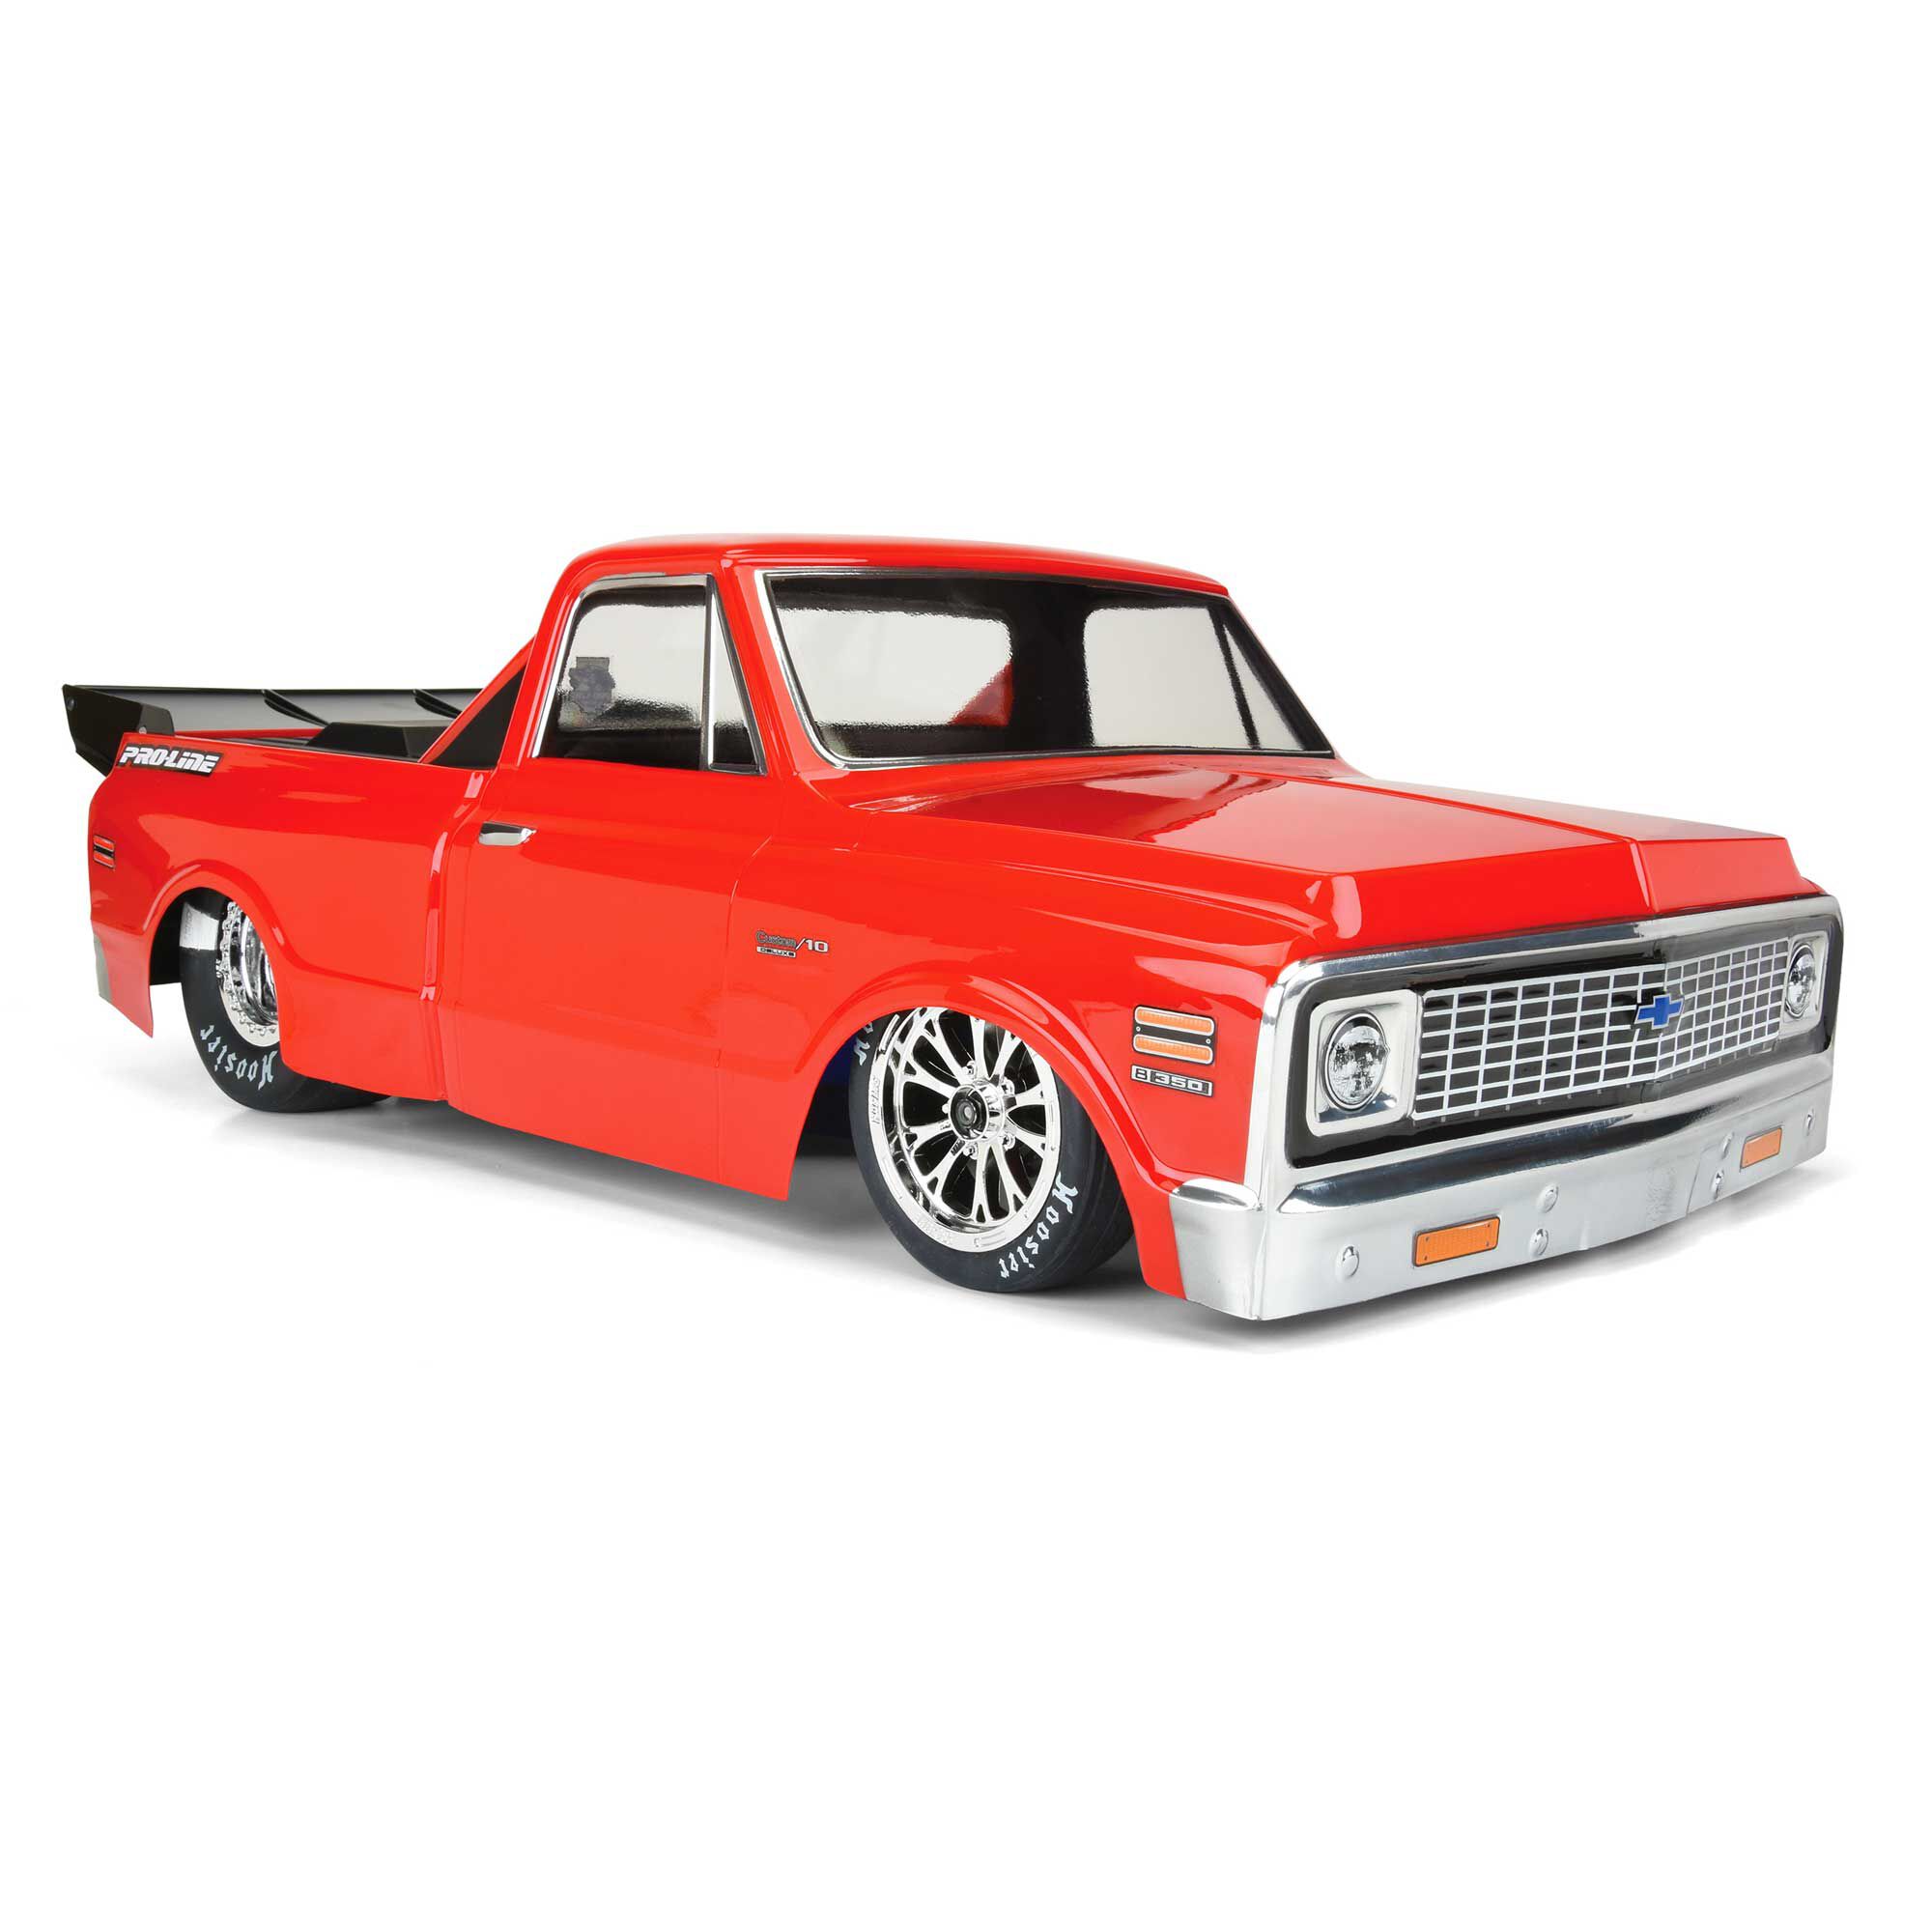 Details about   WRP Racing Products "Drag Slot Car Chassis Kit" #C10 